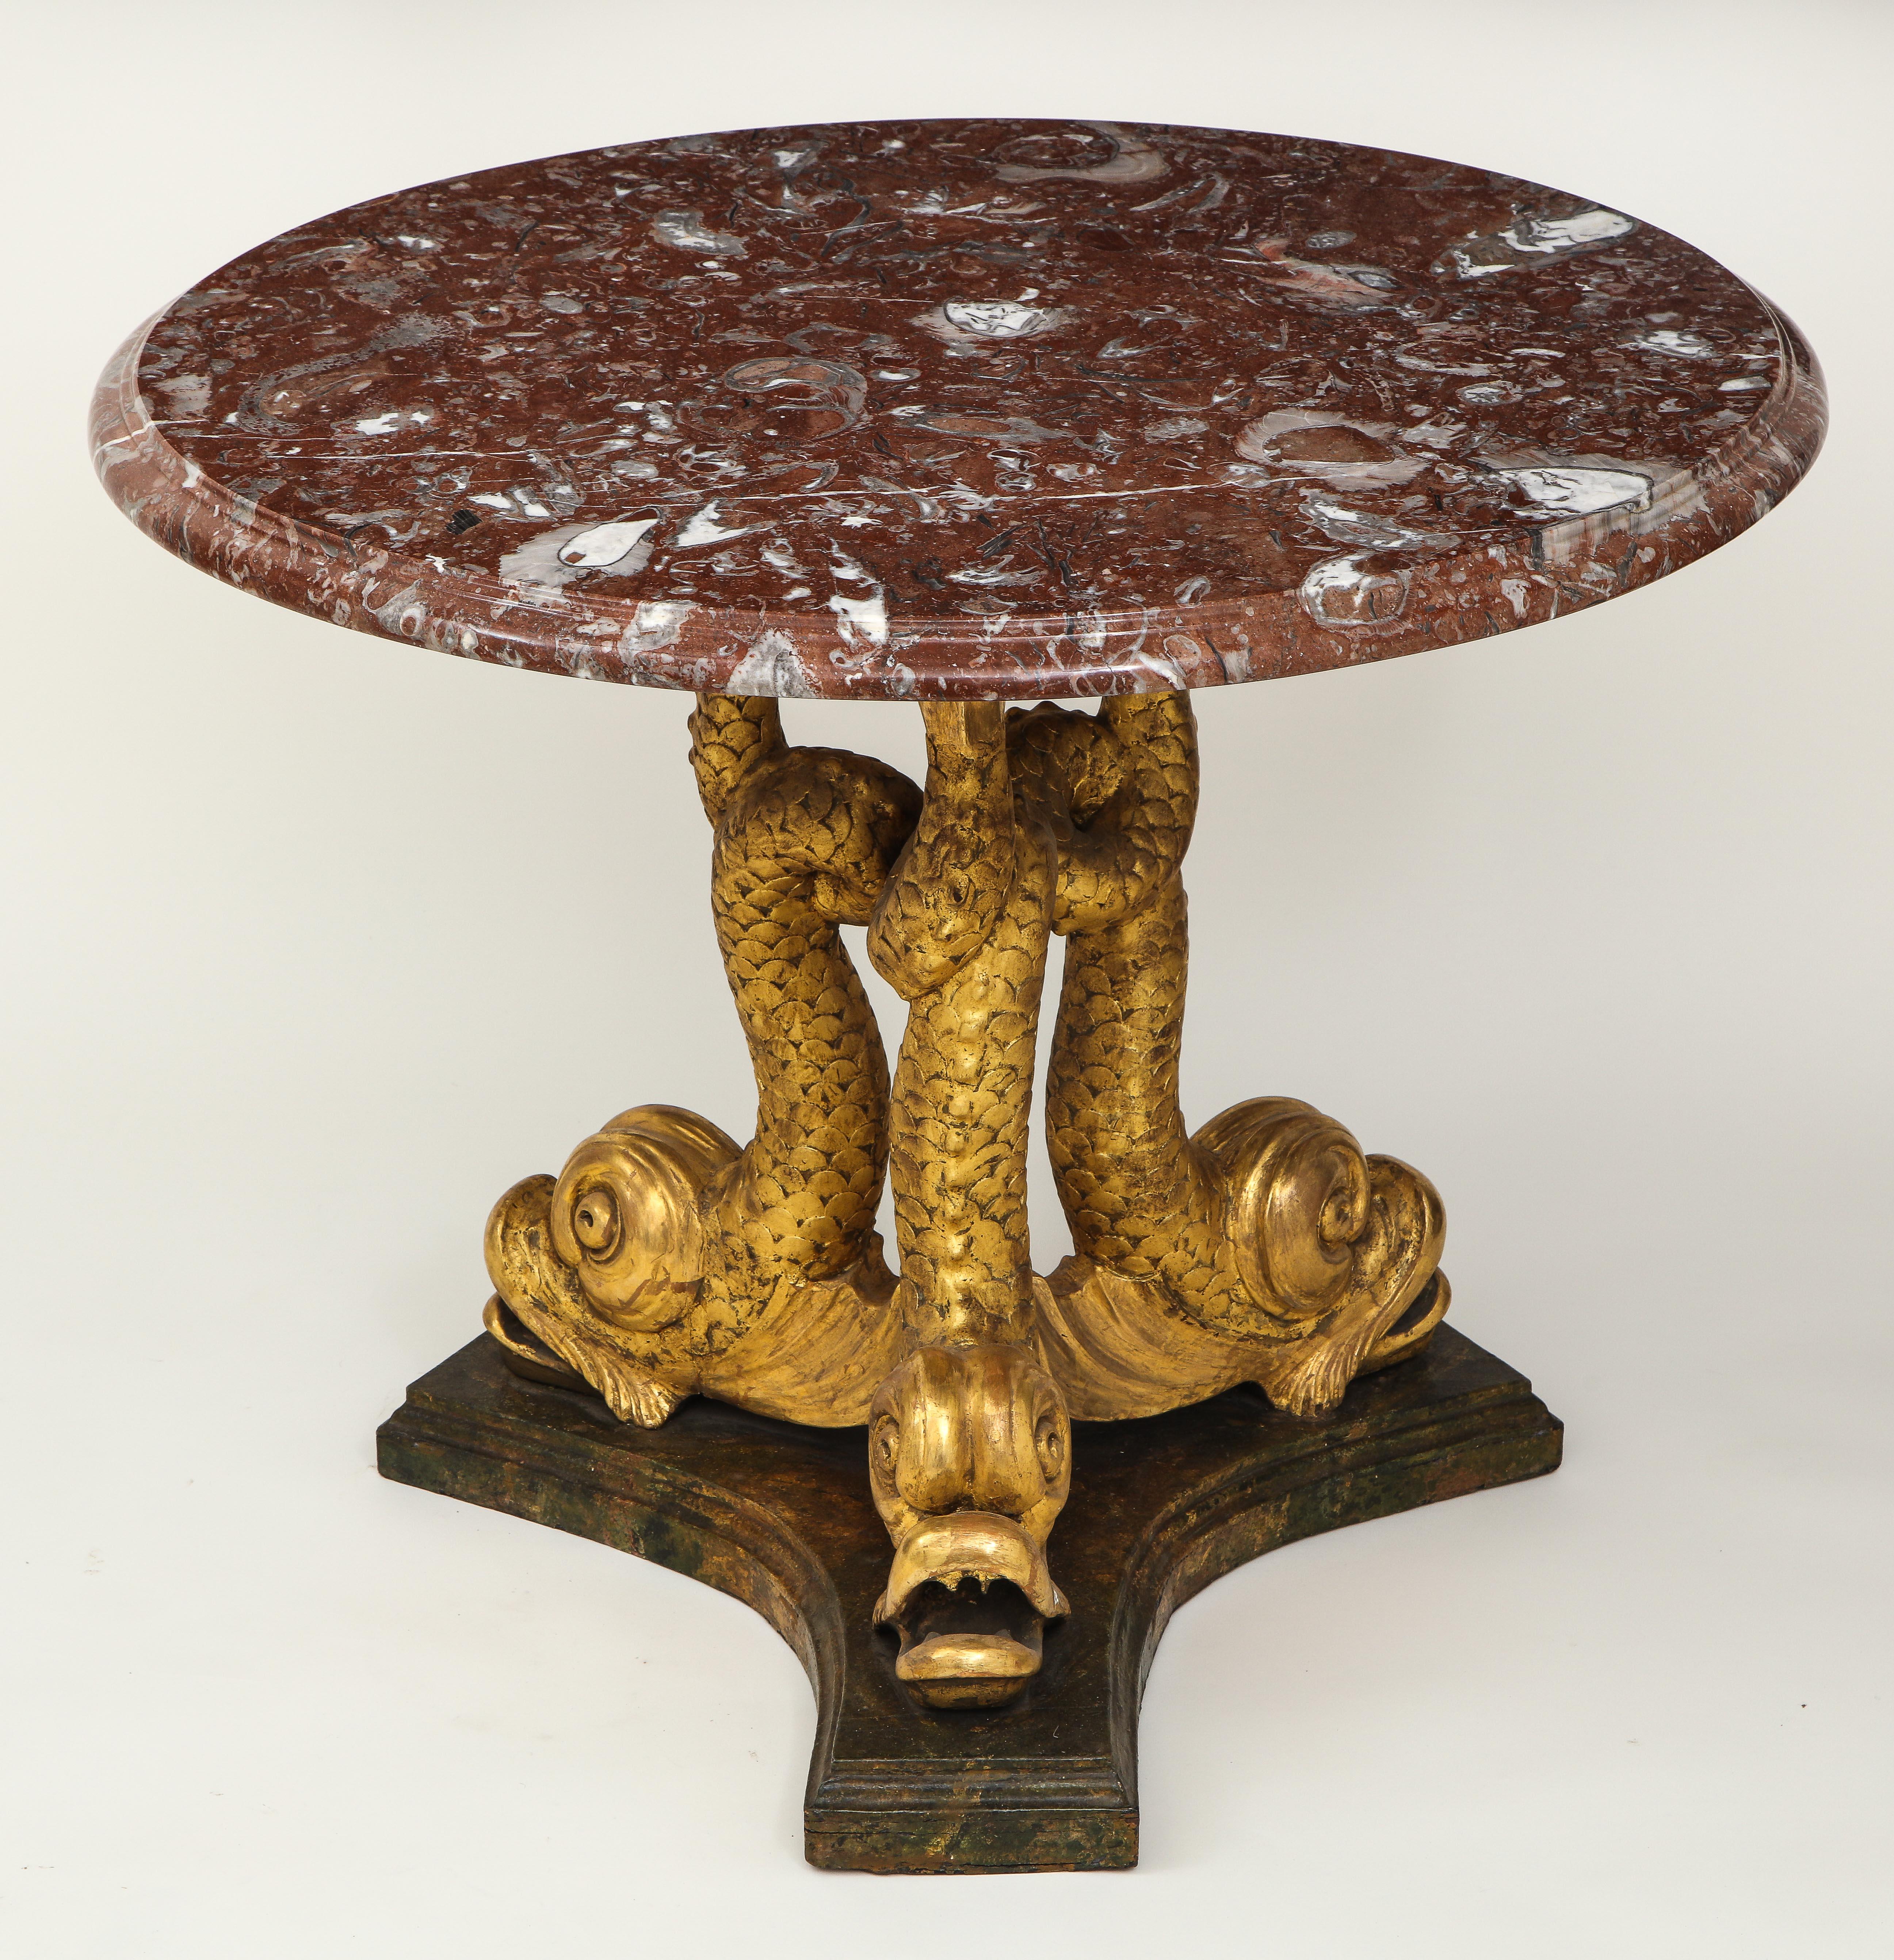 In the Brighton pavilion taste; the round rouge breccia marble top on three carved dolphin supports on a faux marble-painted tripartite base.